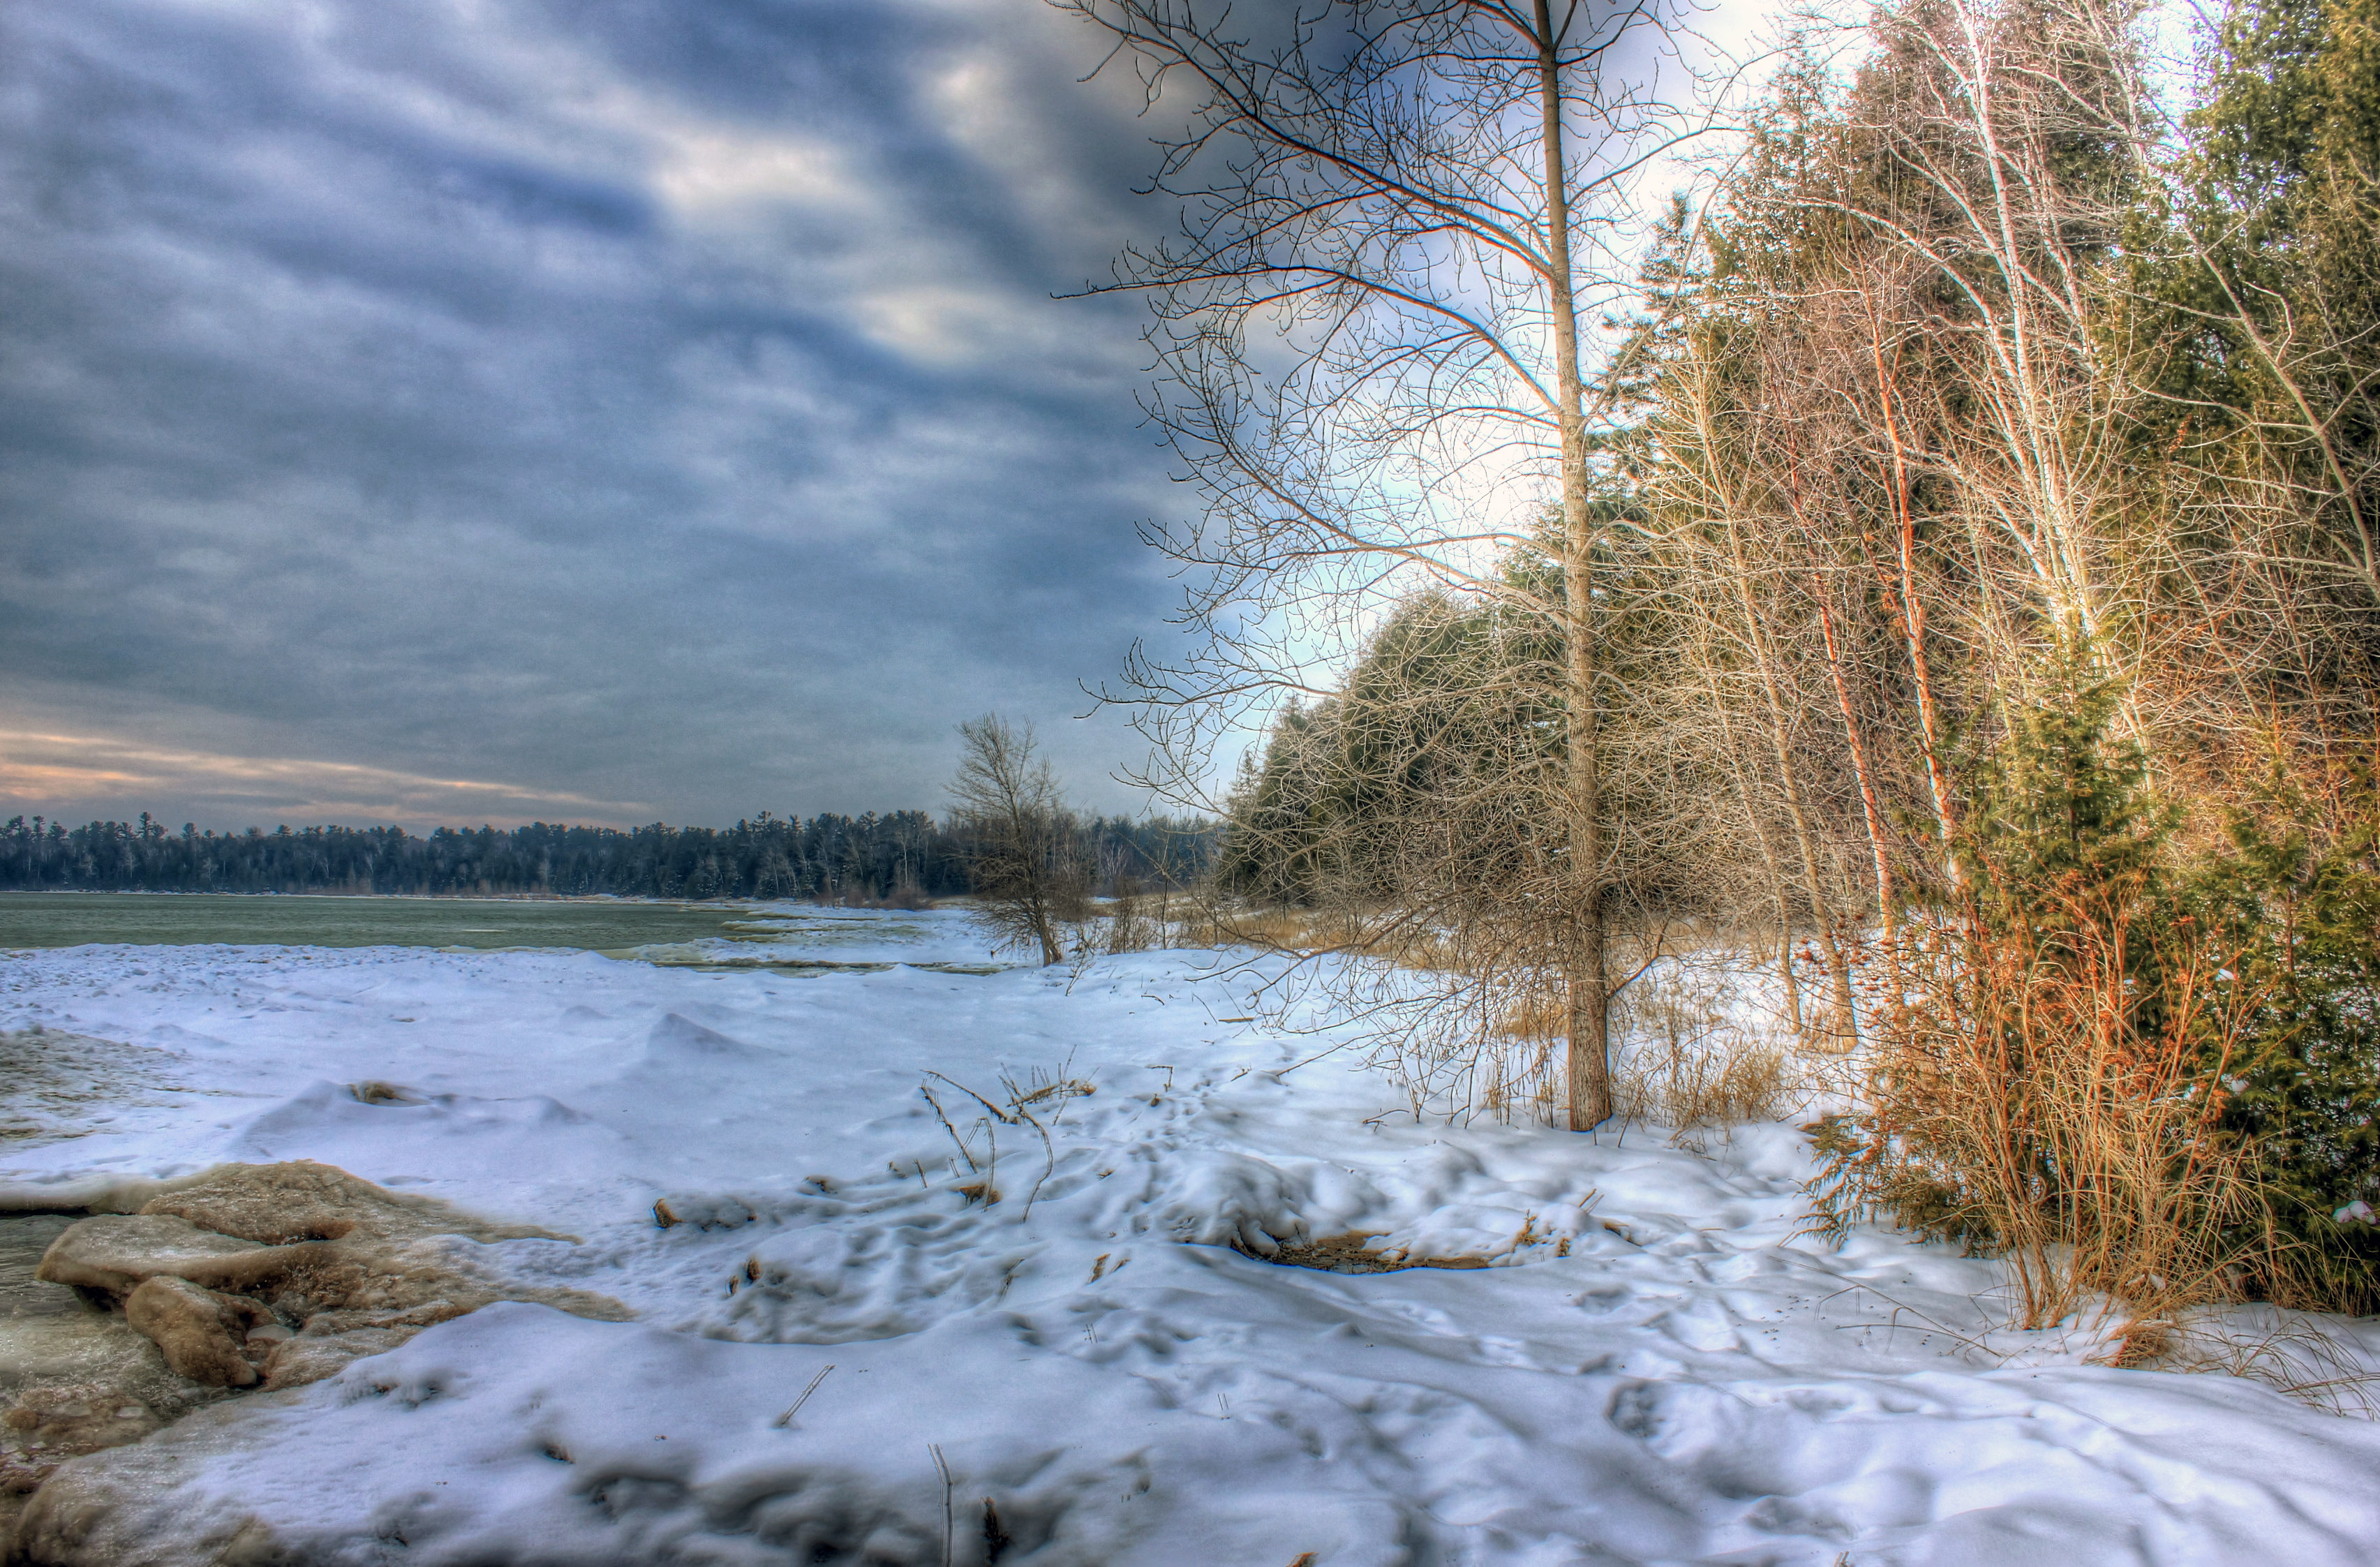 Winter Landscape at Newport State Park, Wisconsin image - Free stock ...